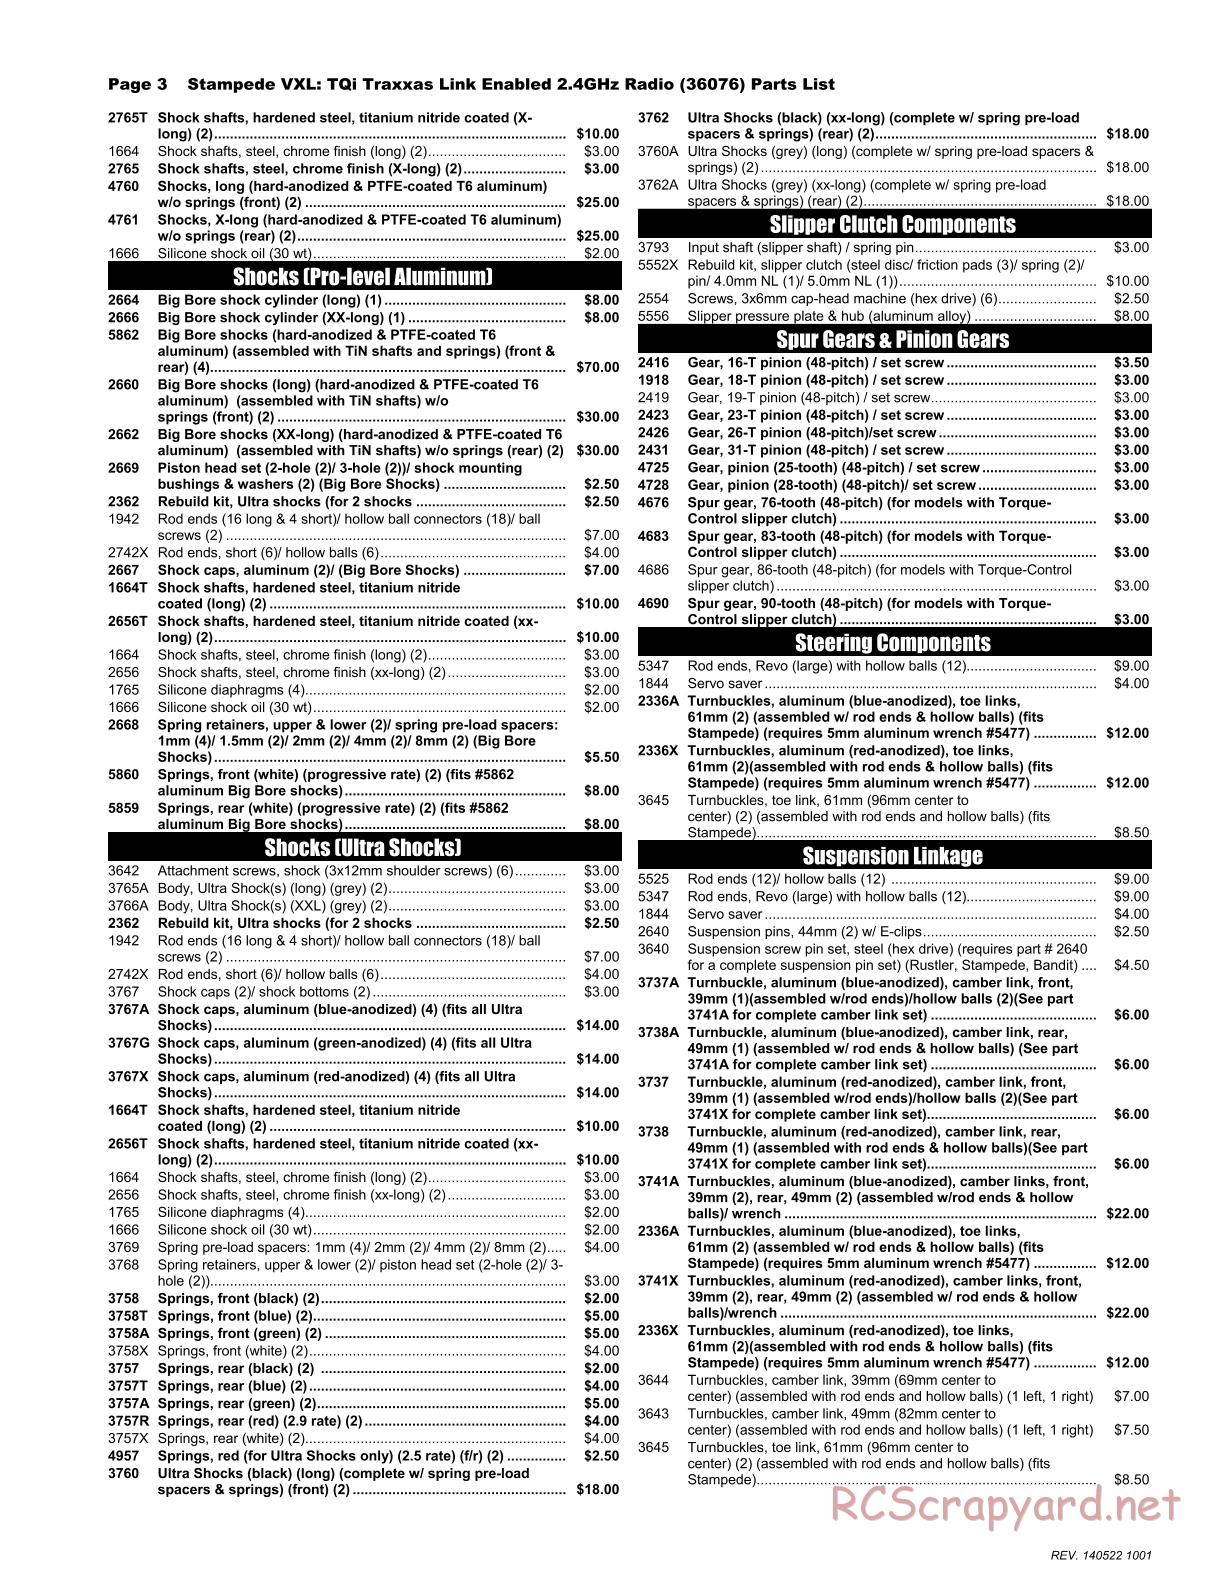 Traxxas - Stampede VXL - Parts List - Page 3